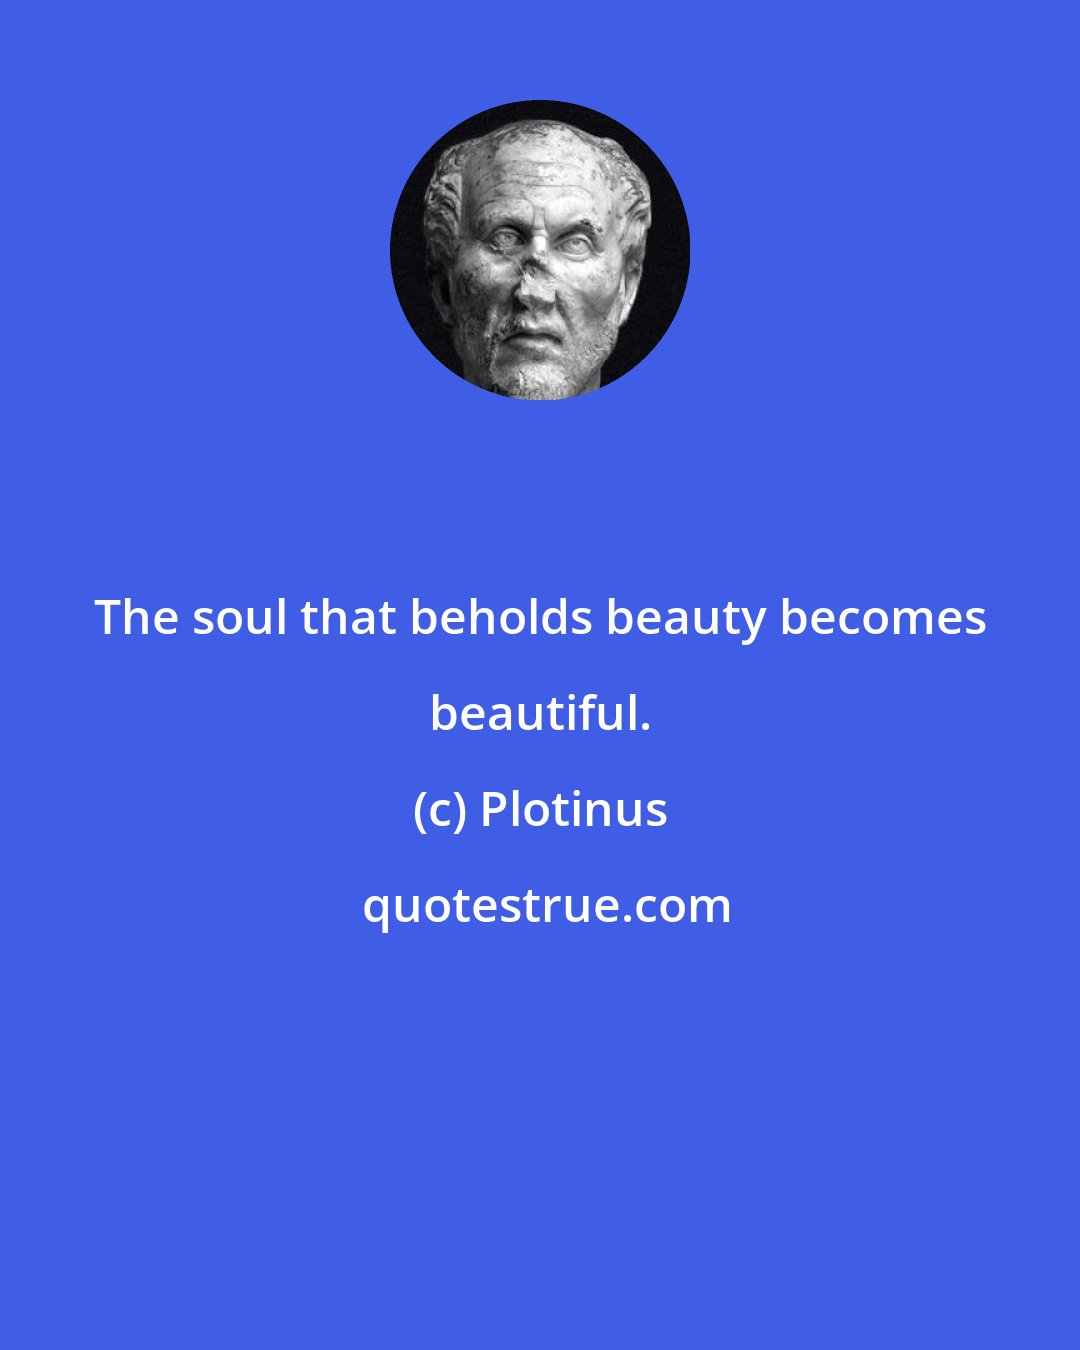 Plotinus: The soul that beholds beauty becomes beautiful.